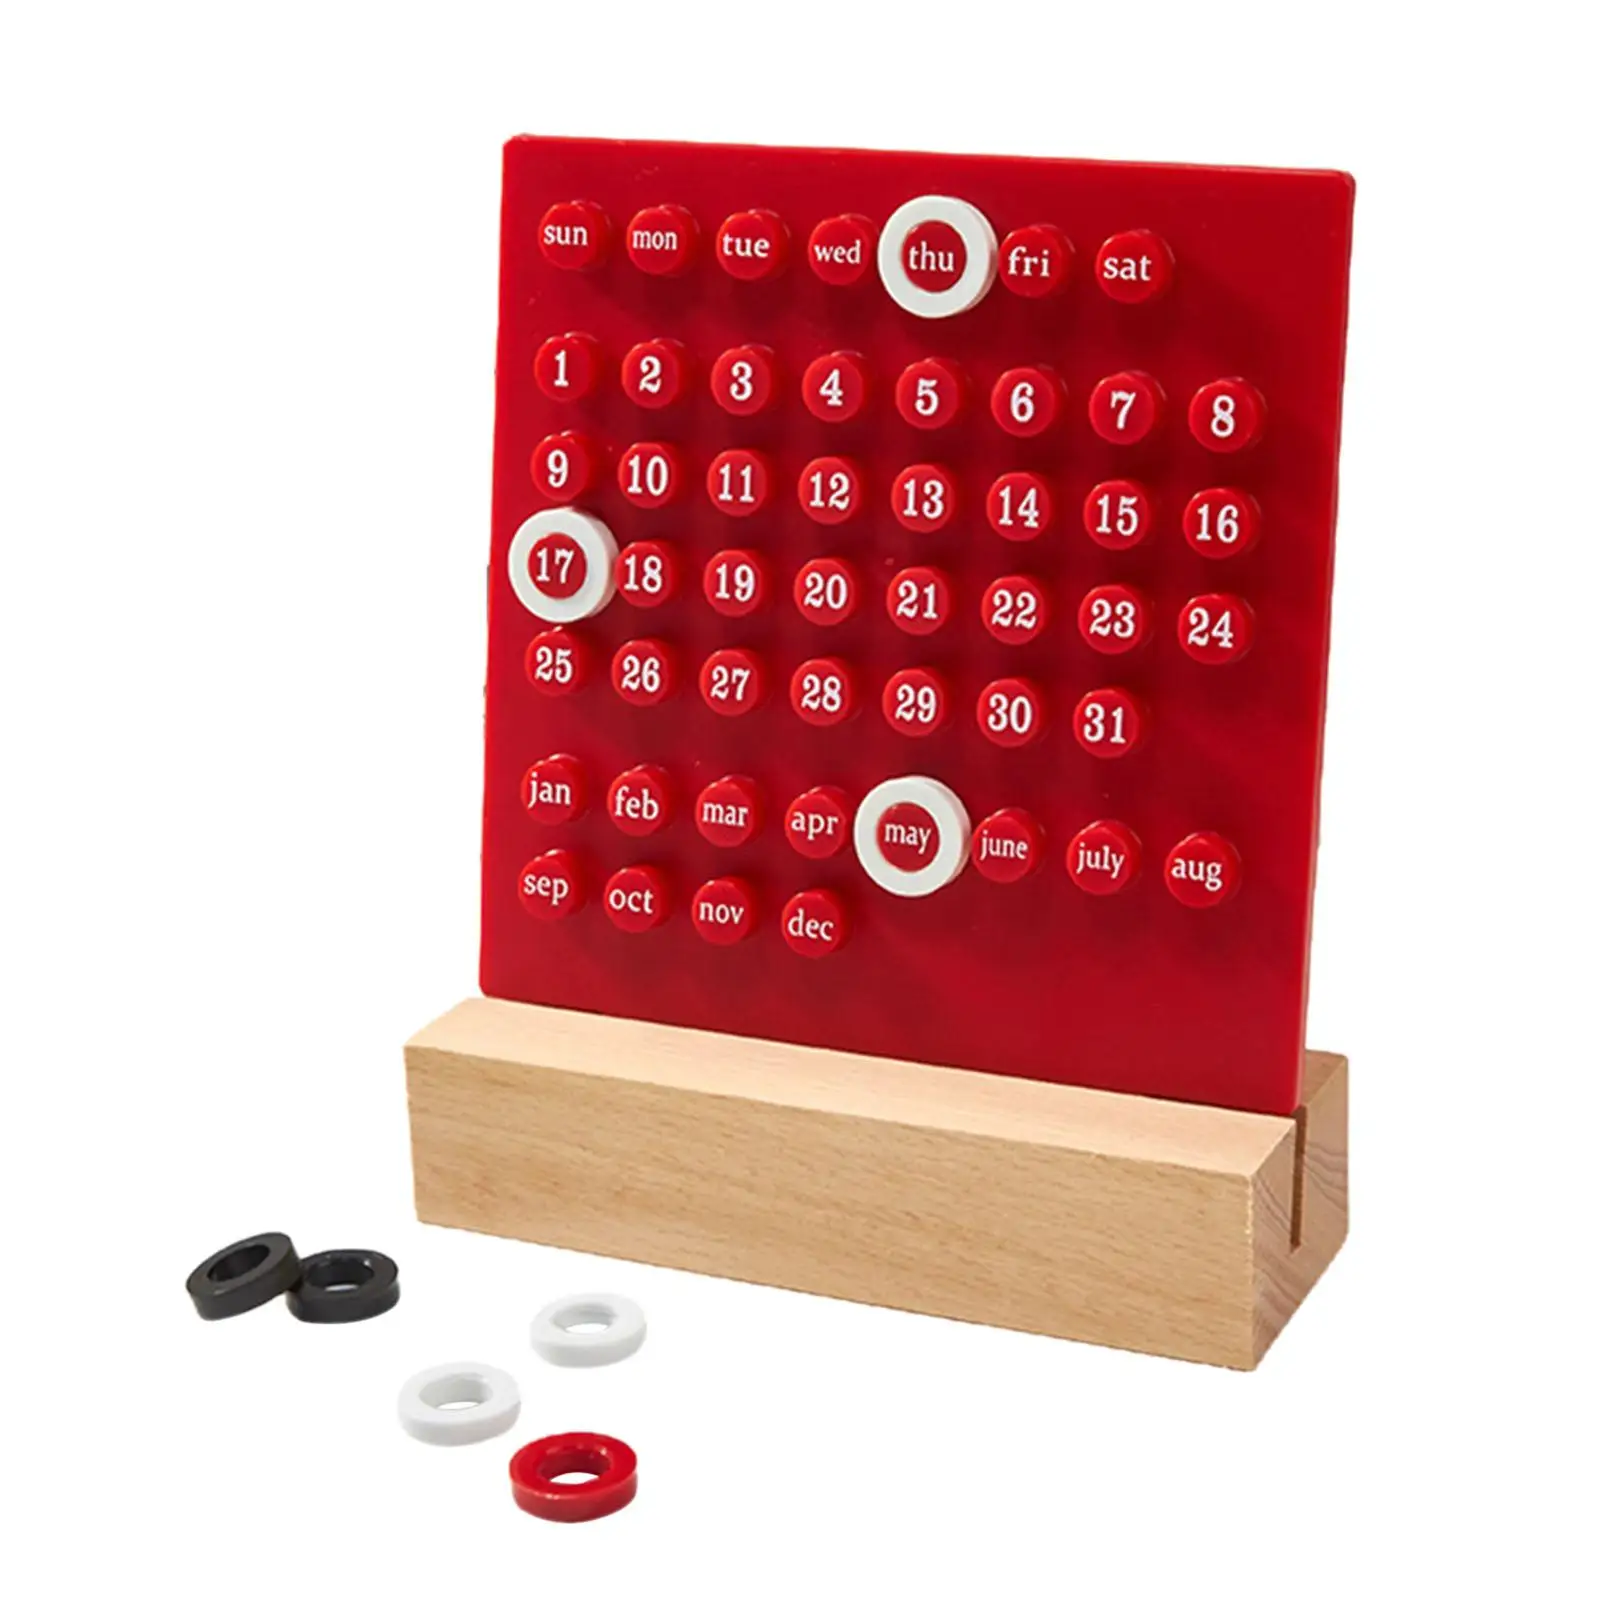 Creative Learning Calendar Educational Month Date Montessori Ornaments Supplies DIY Desk Calendar for Gifts Indoor Office Decor